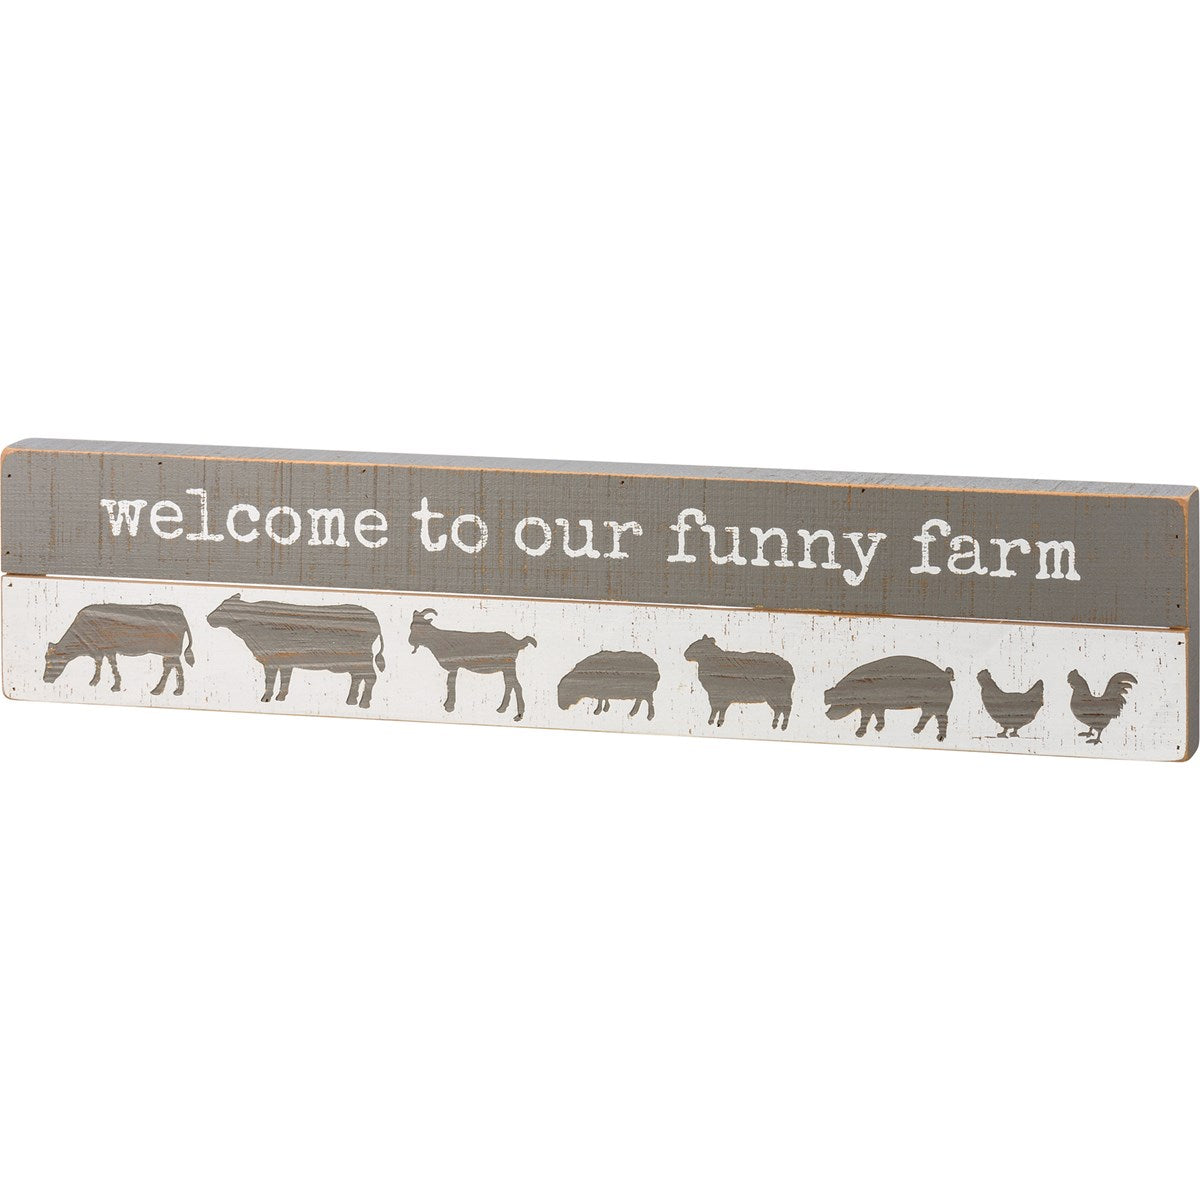 Welcome to the funny farm sign